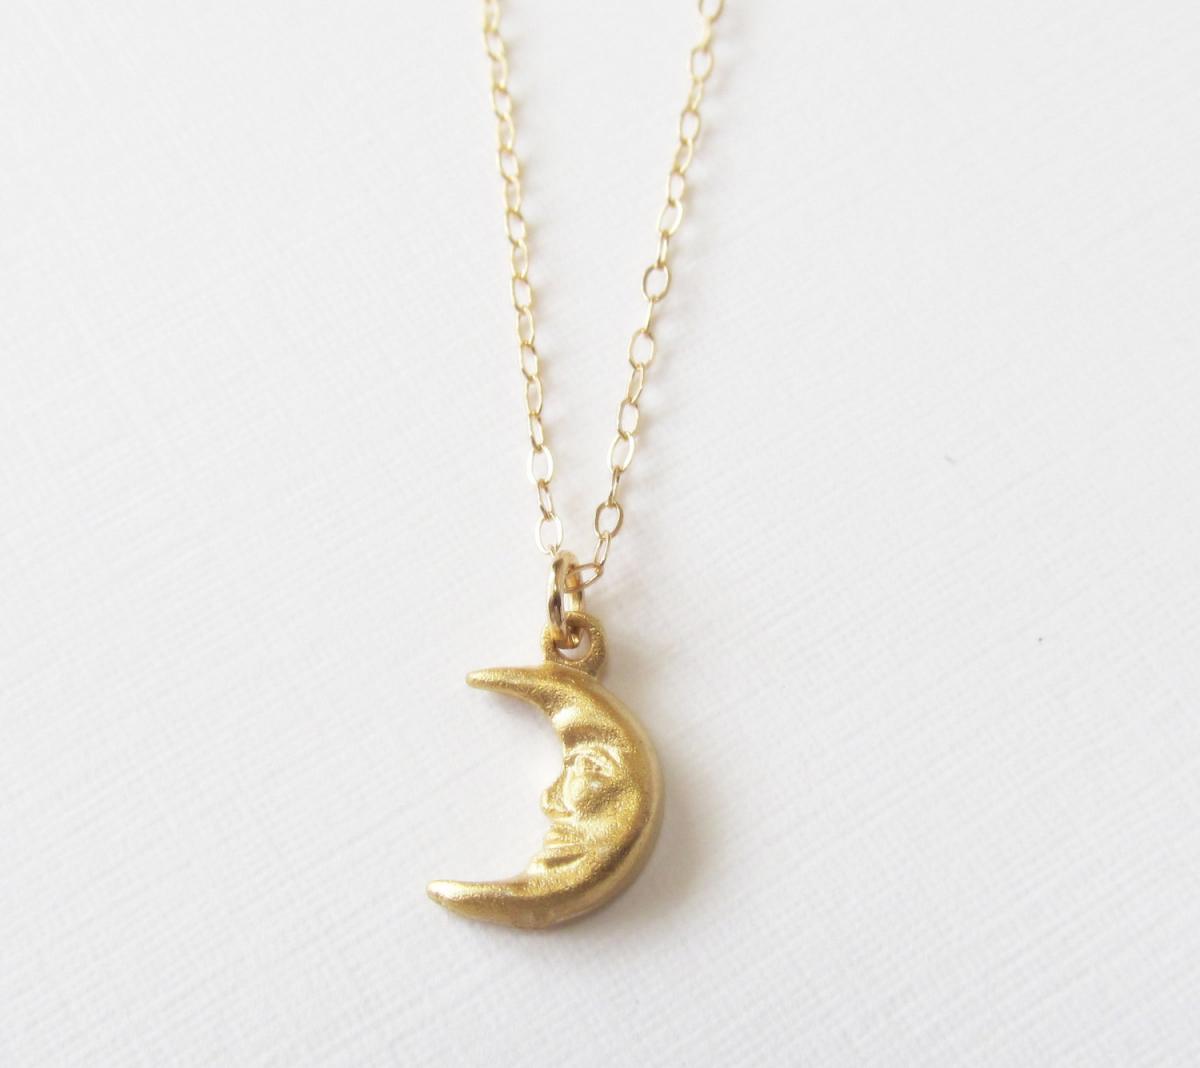 Crescent Moon Necklace, 14kt Gold Filled Necklace Gift For Her